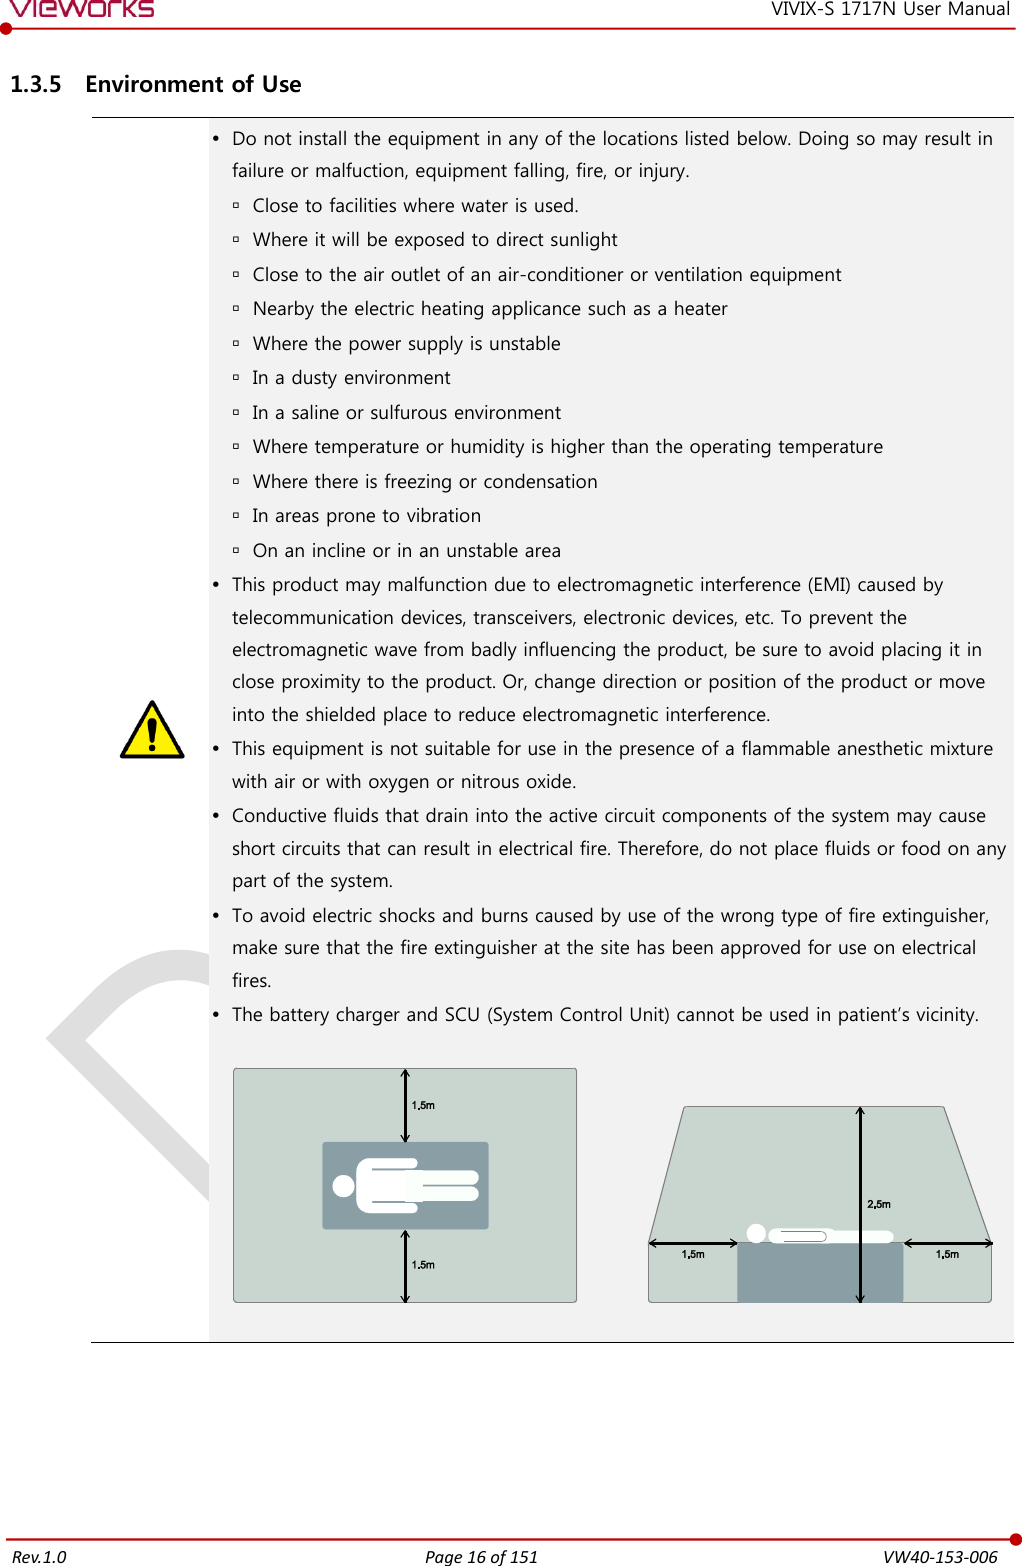   Rev.1.0 Page 16 of 151  VW40-153-006 VIVIX-S 1717N User Manual 1.3.5 Environment of Use   Do not install the equipment in any of the locations listed below. Doing so may result in failure or malfuction, equipment falling, fire, or injury.  Close to facilities where water is used.  Where it will be exposed to direct sunlight  Close to the air outlet of an air-conditioner or ventilation equipment  Nearby the electric heating applicance such as a heater  Where the power supply is unstable  In a dusty environment  In a saline or sulfurous environment  Where temperature or humidity is higher than the operating temperature  Where there is freezing or condensation  In areas prone to vibration  On an incline or in an unstable area  This product may malfunction due to electromagnetic interference (EMI) caused by telecommunication devices, transceivers, electronic devices, etc. To prevent the electromagnetic wave from badly influencing the product, be sure to avoid placing it in close proximity to the product. Or, change direction or position of the product or move into the shielded place to reduce electromagnetic interference.  This equipment is not suitable for use in the presence of a flammable anesthetic mixture with air or with oxygen or nitrous oxide.  Conductive fluids that drain into the active circuit components of the system may cause short circuits that can result in electrical fire. Therefore, do not place fluids or food on any part of the system.  To avoid electric shocks and burns caused by use of the wrong type of fire extinguisher, make sure that the fire extinguisher at the site has been approved for use on electrical fires.  The battery charger and SCU (System Control Unit) cannot be used in patient’s vicinity.         